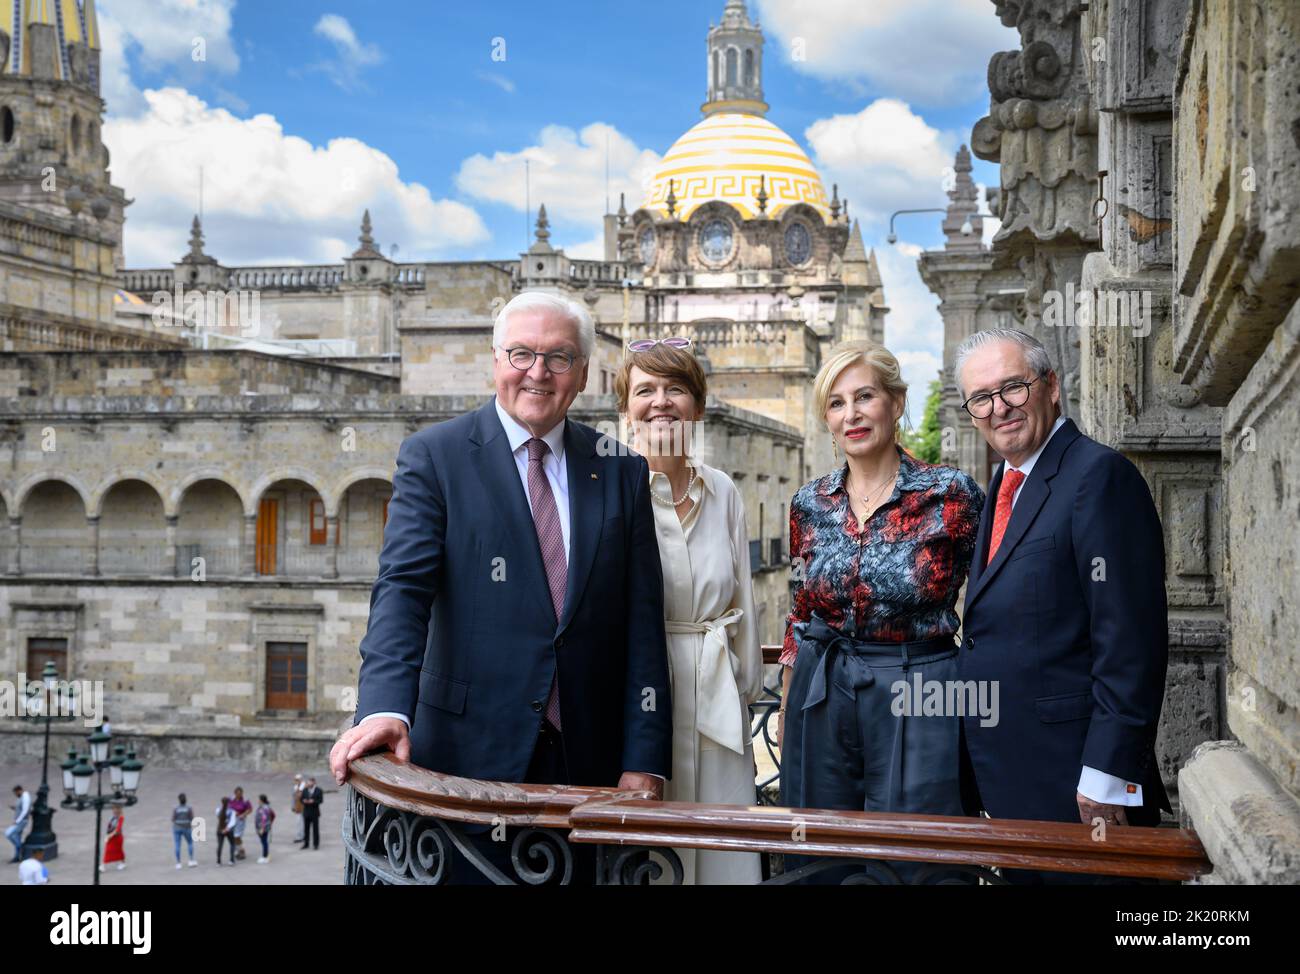 Guadalajara, Mexico. 21st Sep, 2022. German President Frank-Walter Steinmeier (l) and his wife Elke Büdenbender (2nd from left) are welcomed at the Palace of the Government of the State of Jalisco by Juan Enrique Ibarra Pedroza, Secretary General of the Government of the State of Jalisco, and his wife Guadalupe Gallo Perez. President Steinmeier and his wife are on a two-day visit to Mexico. Credit: Bernd von Jutrczenka/dpa/Alamy Live News Stock Photo